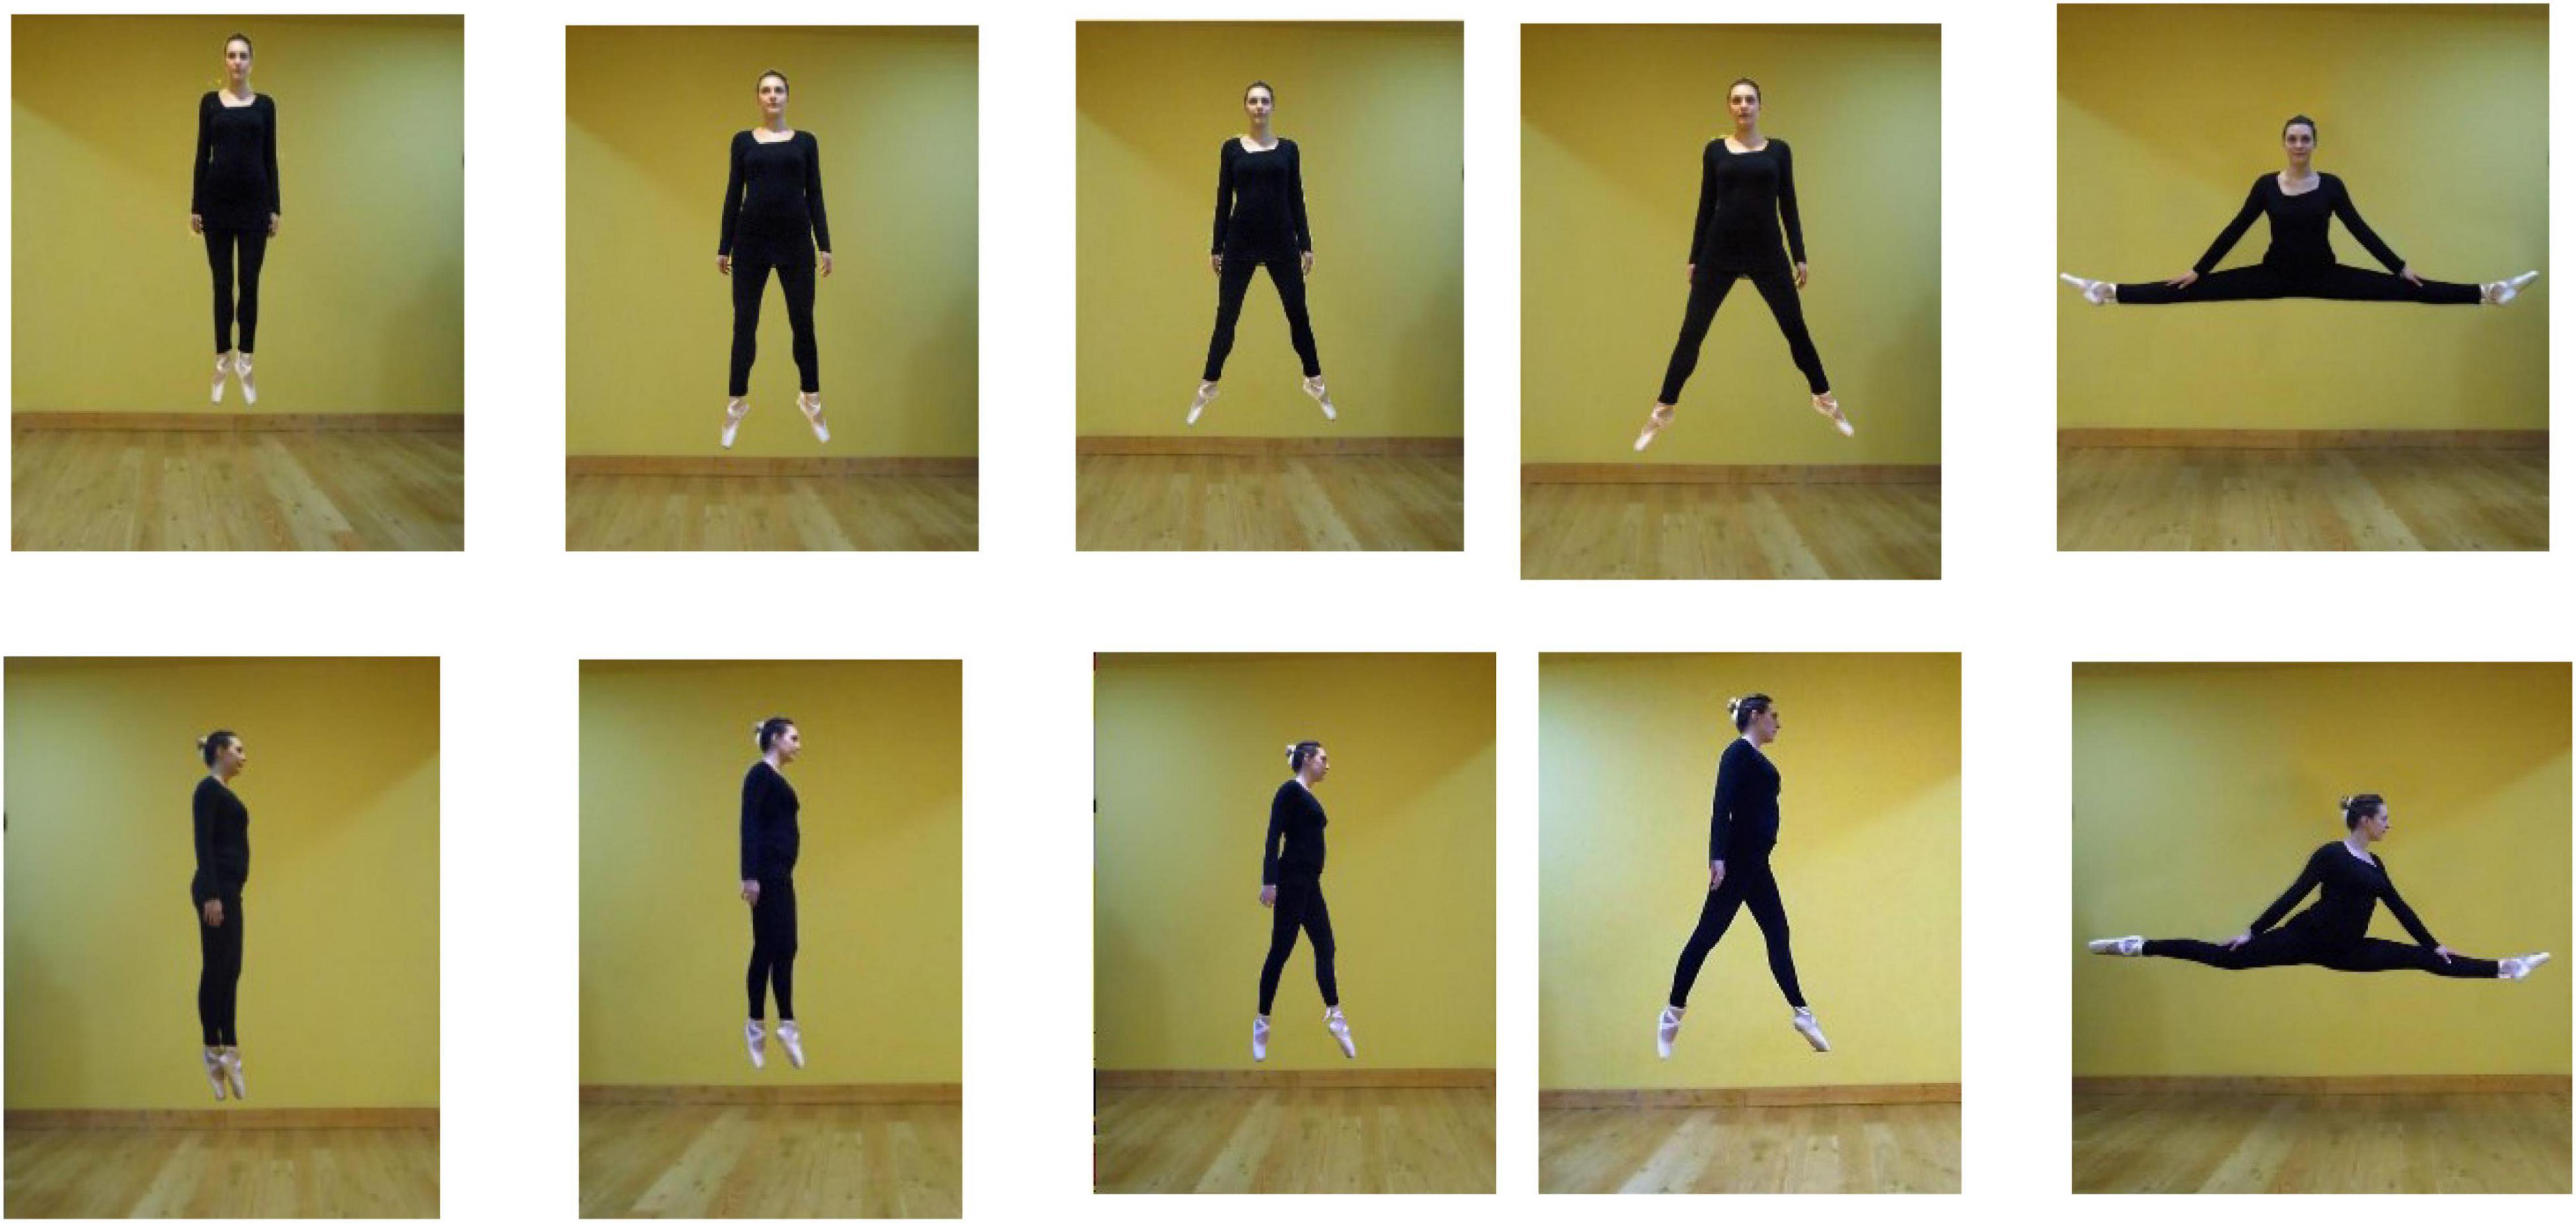 Postures and Direction of Movement